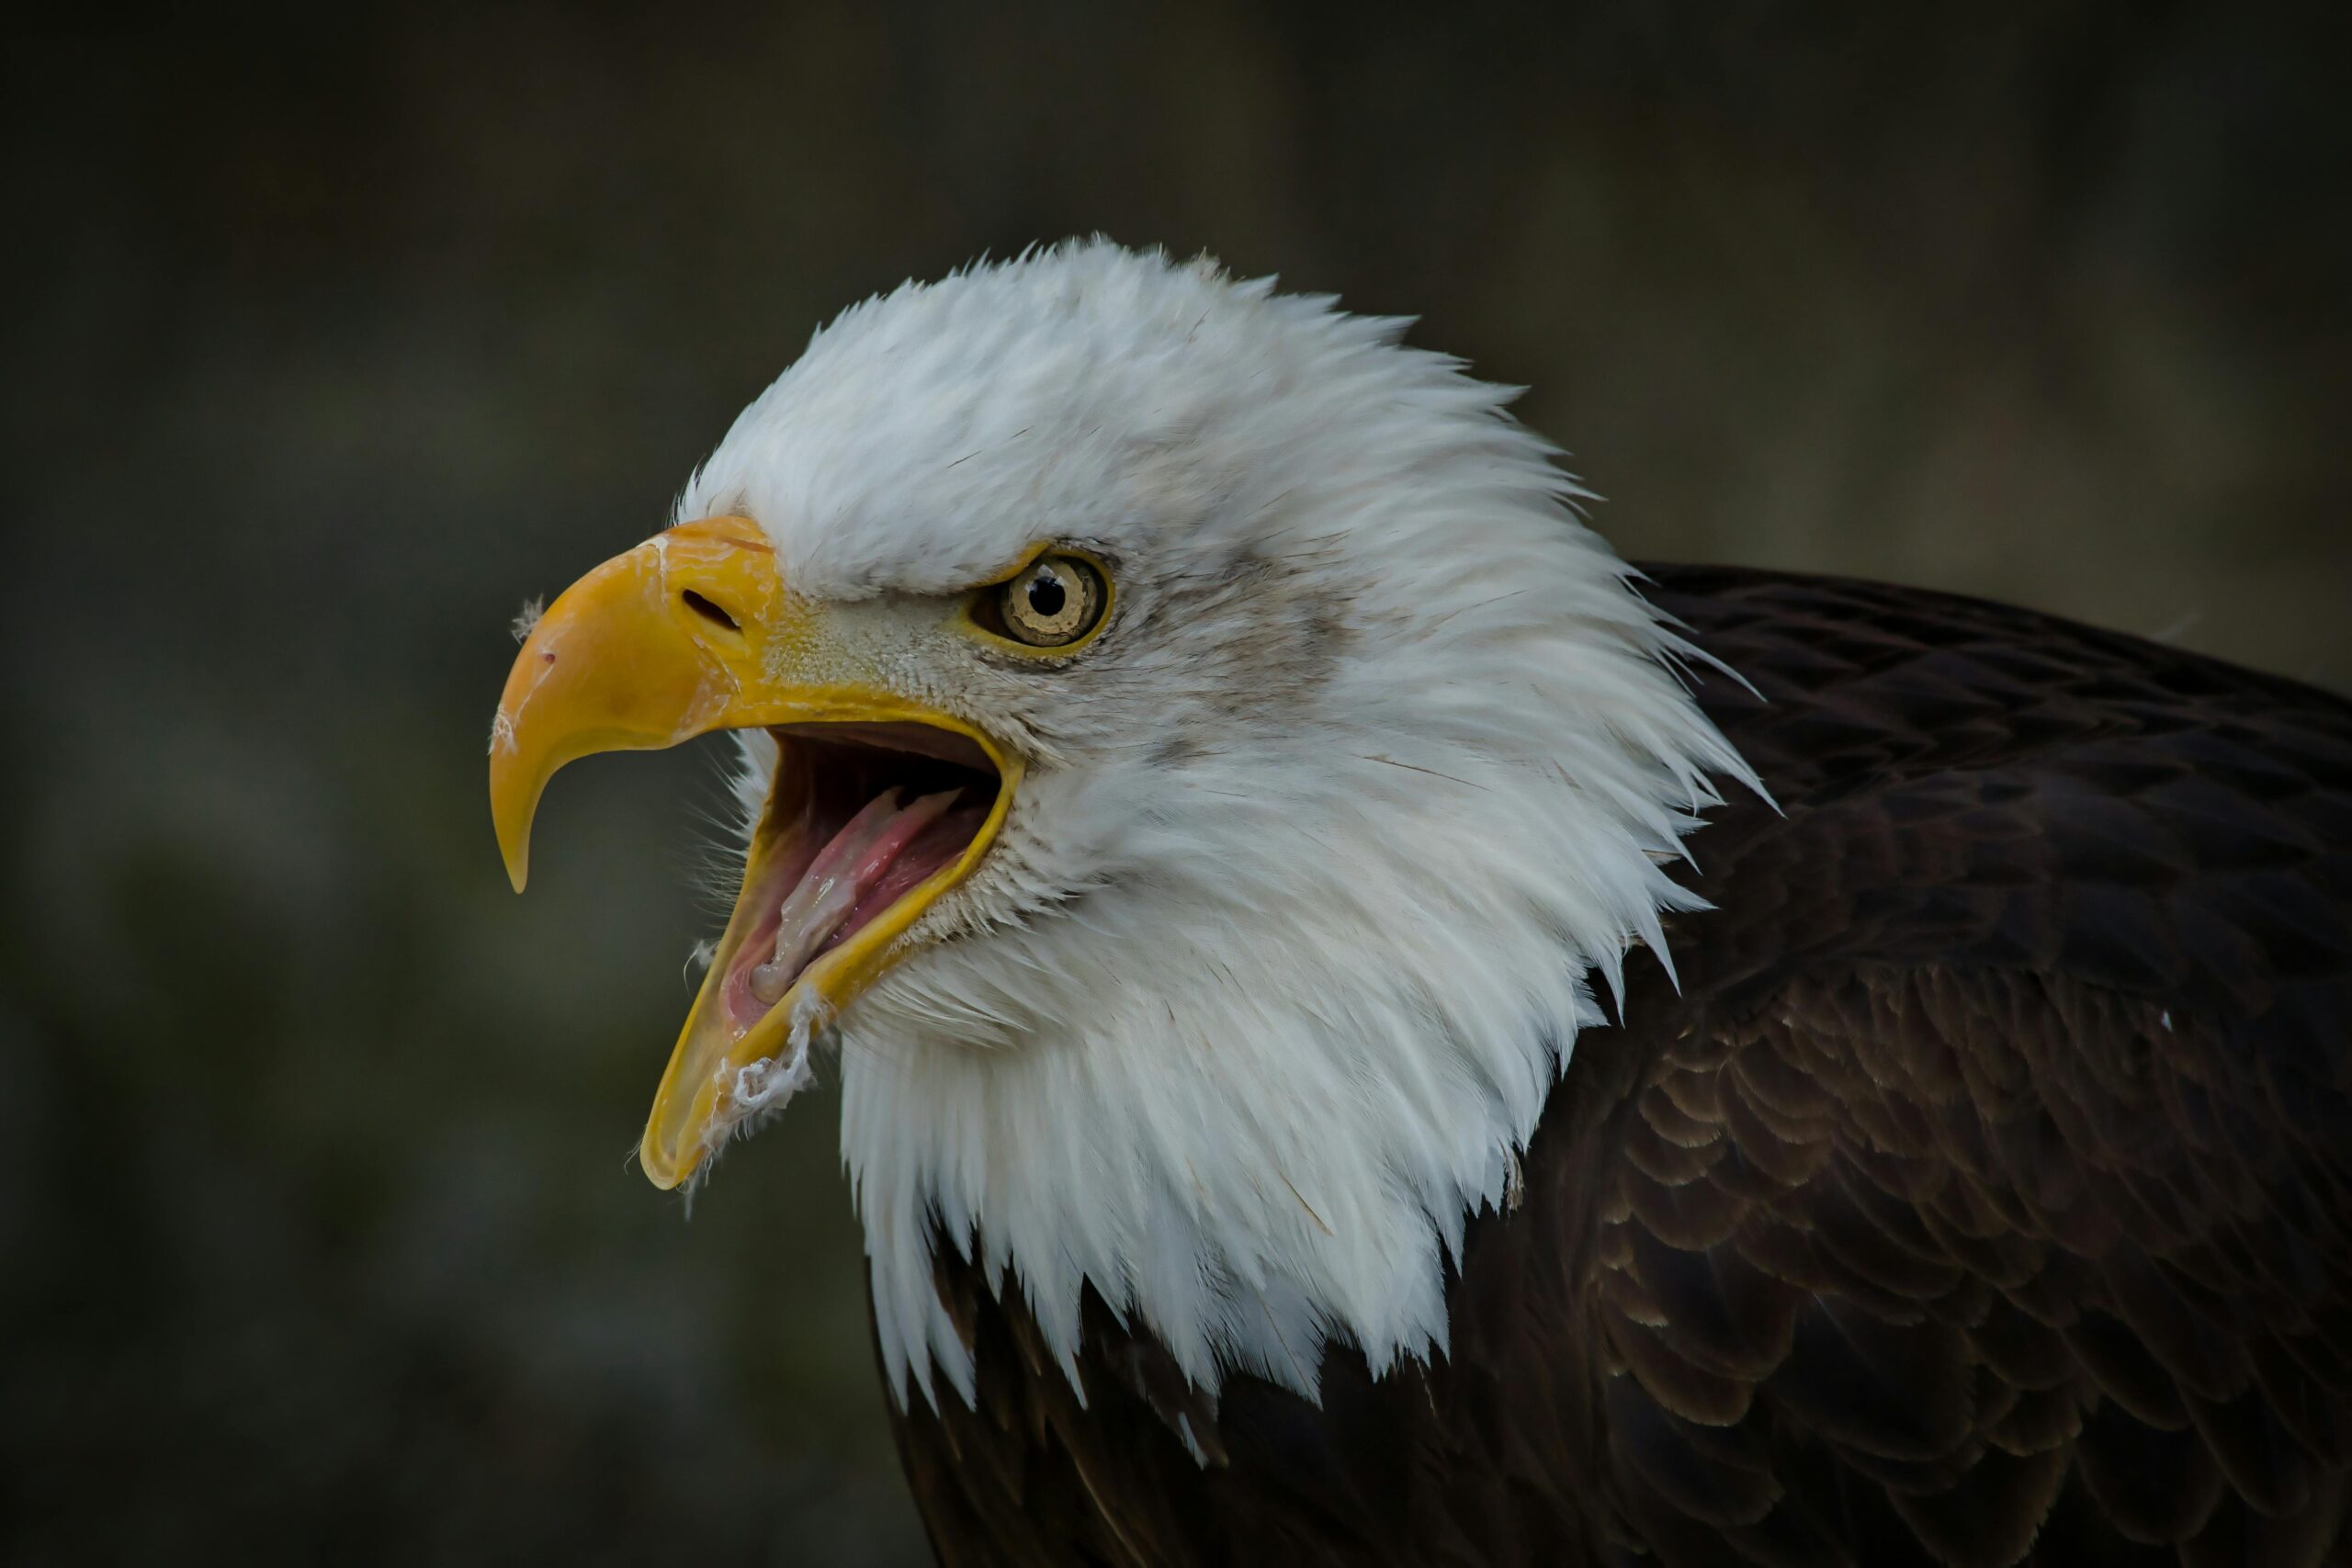 are there bald eagles in Skagit County